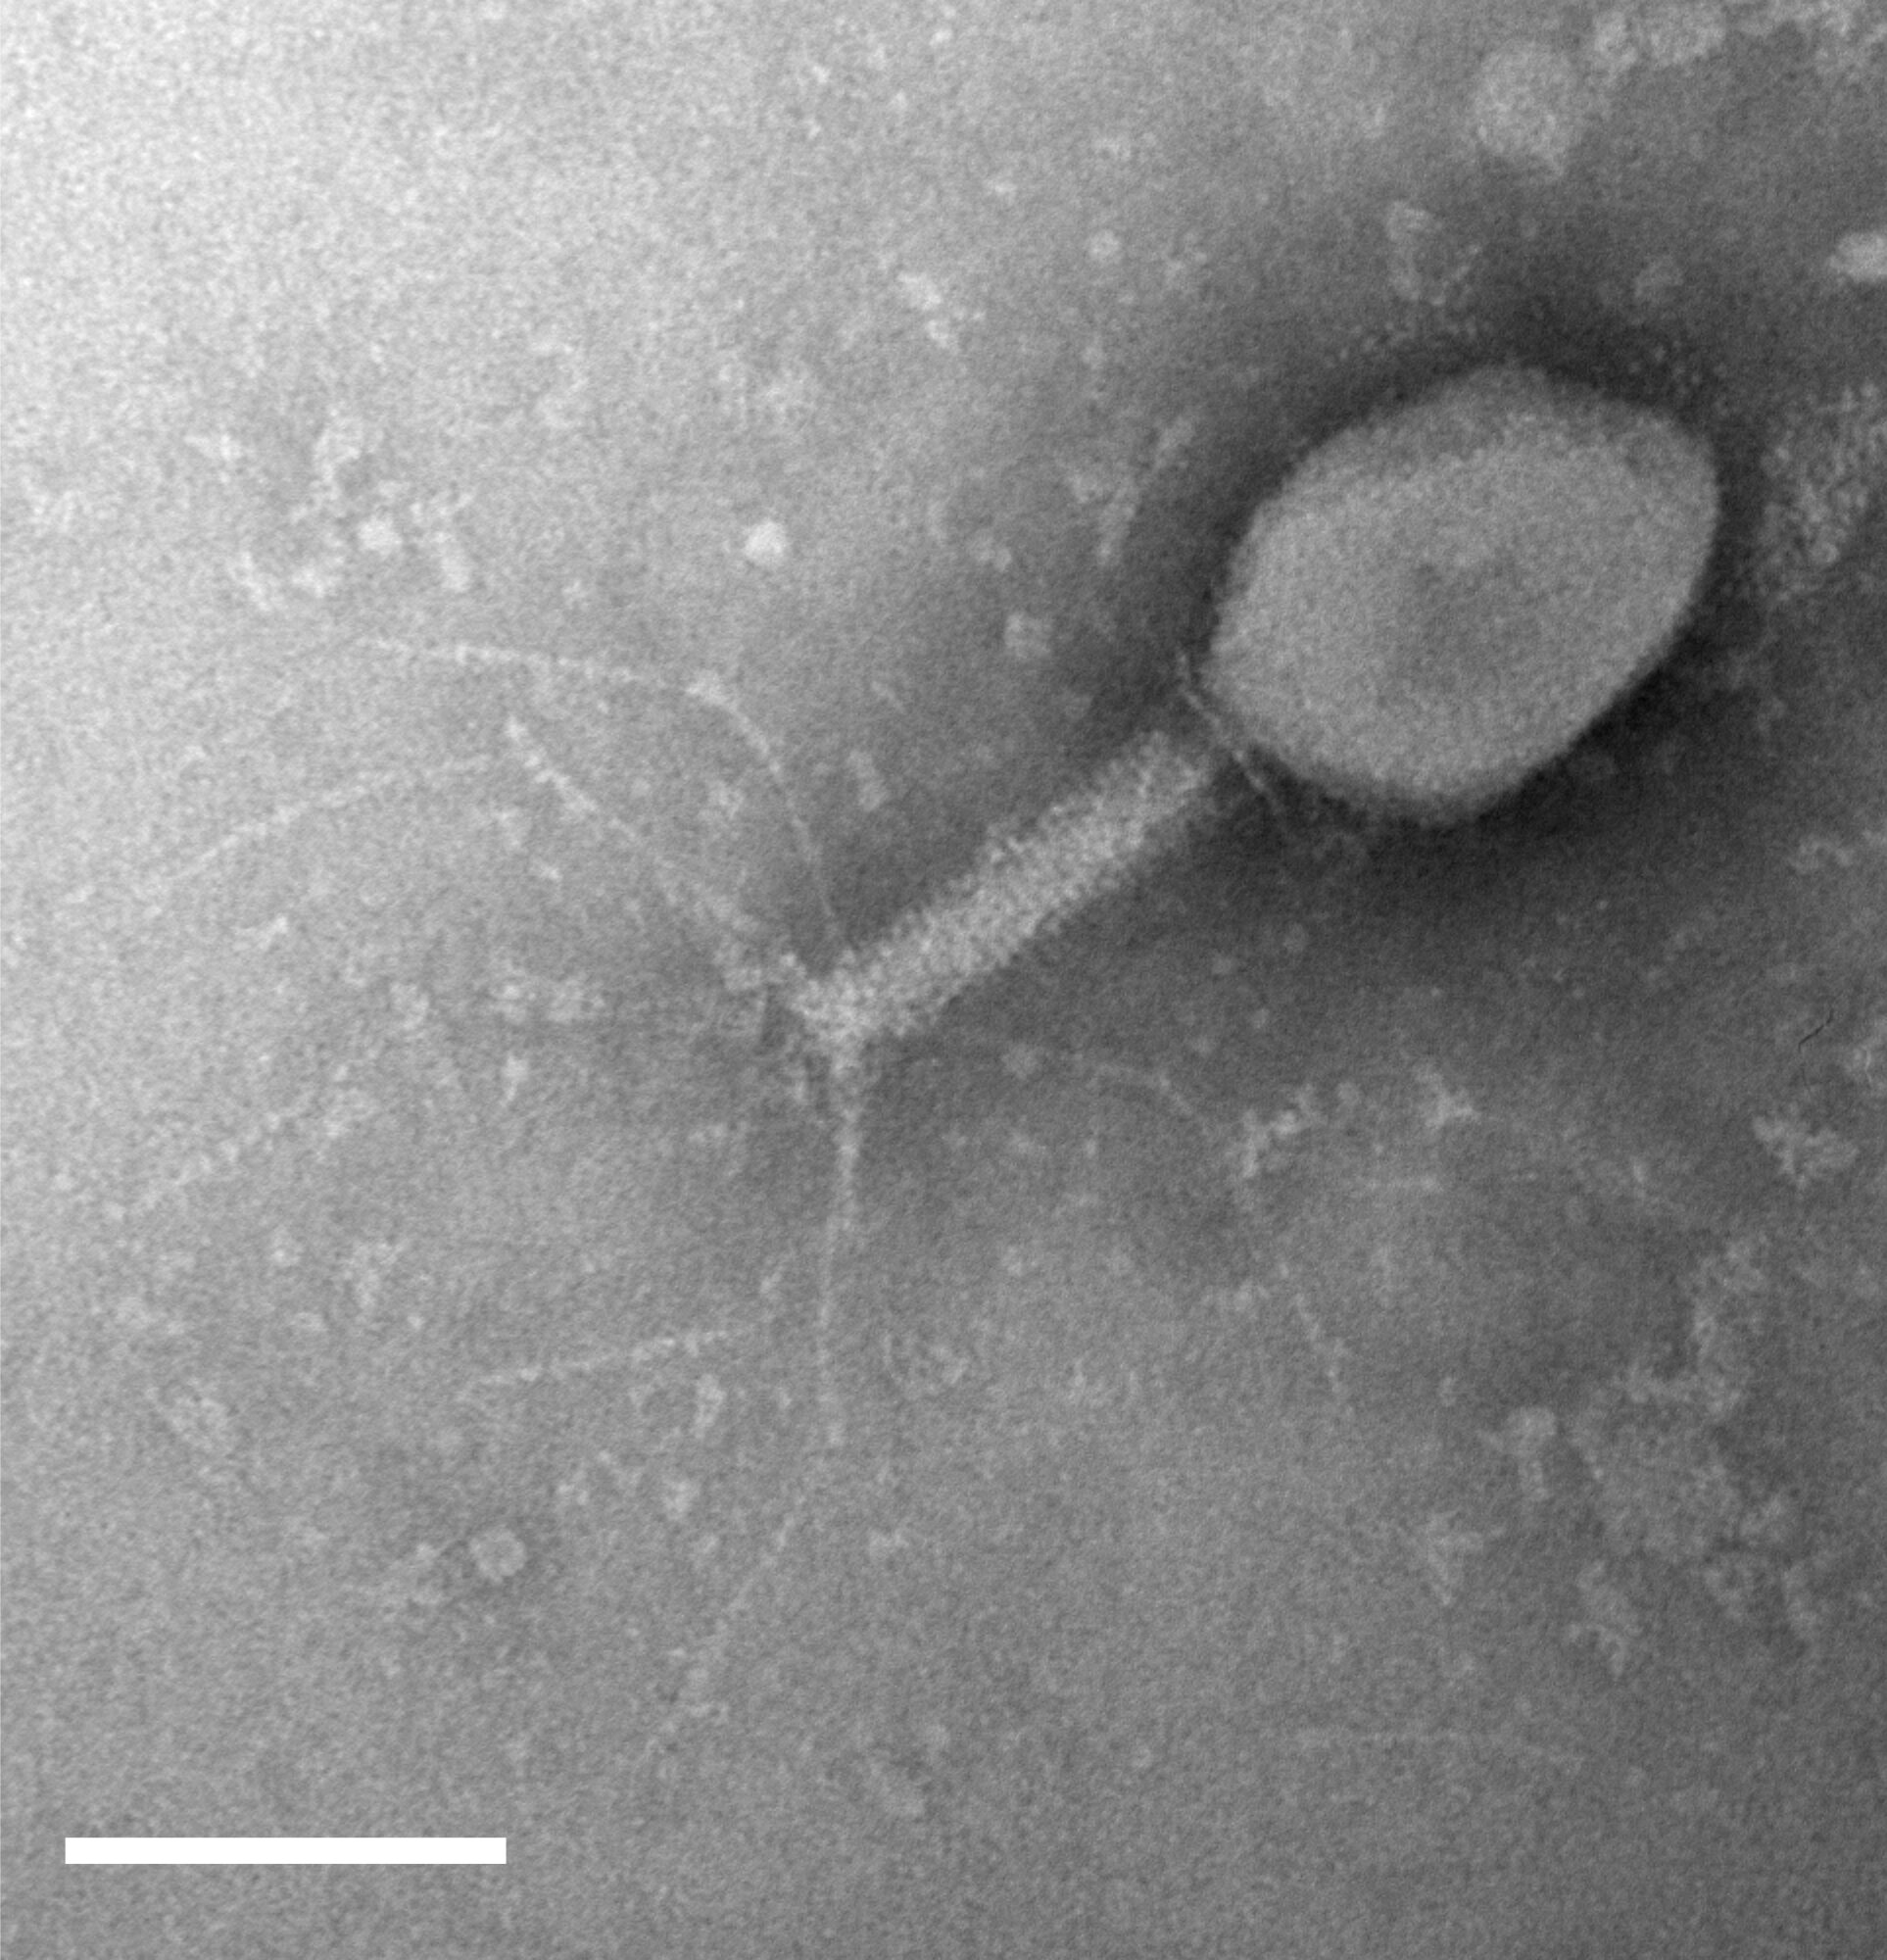 Bacteria can develop strong immunity for protection against viruses